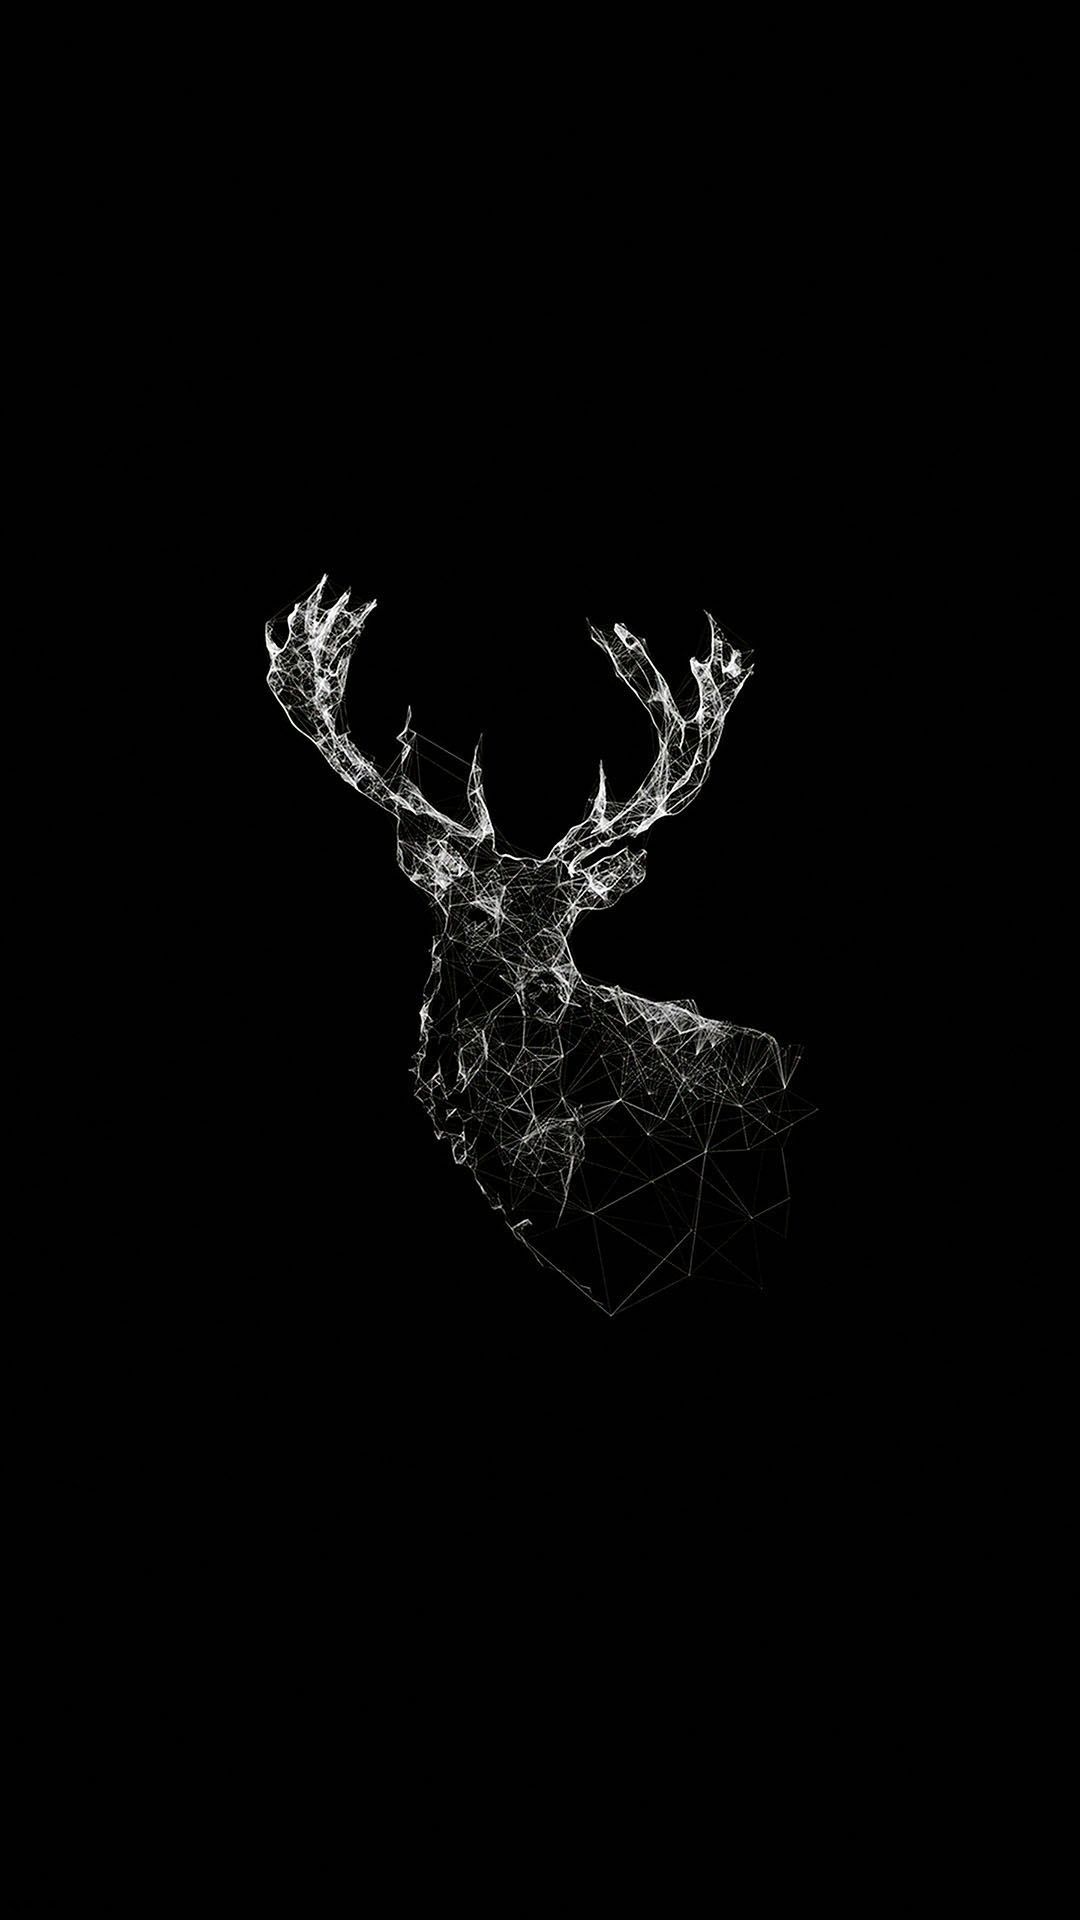 Low Poly Deer Illustration Android Wallpaper Painting Deer